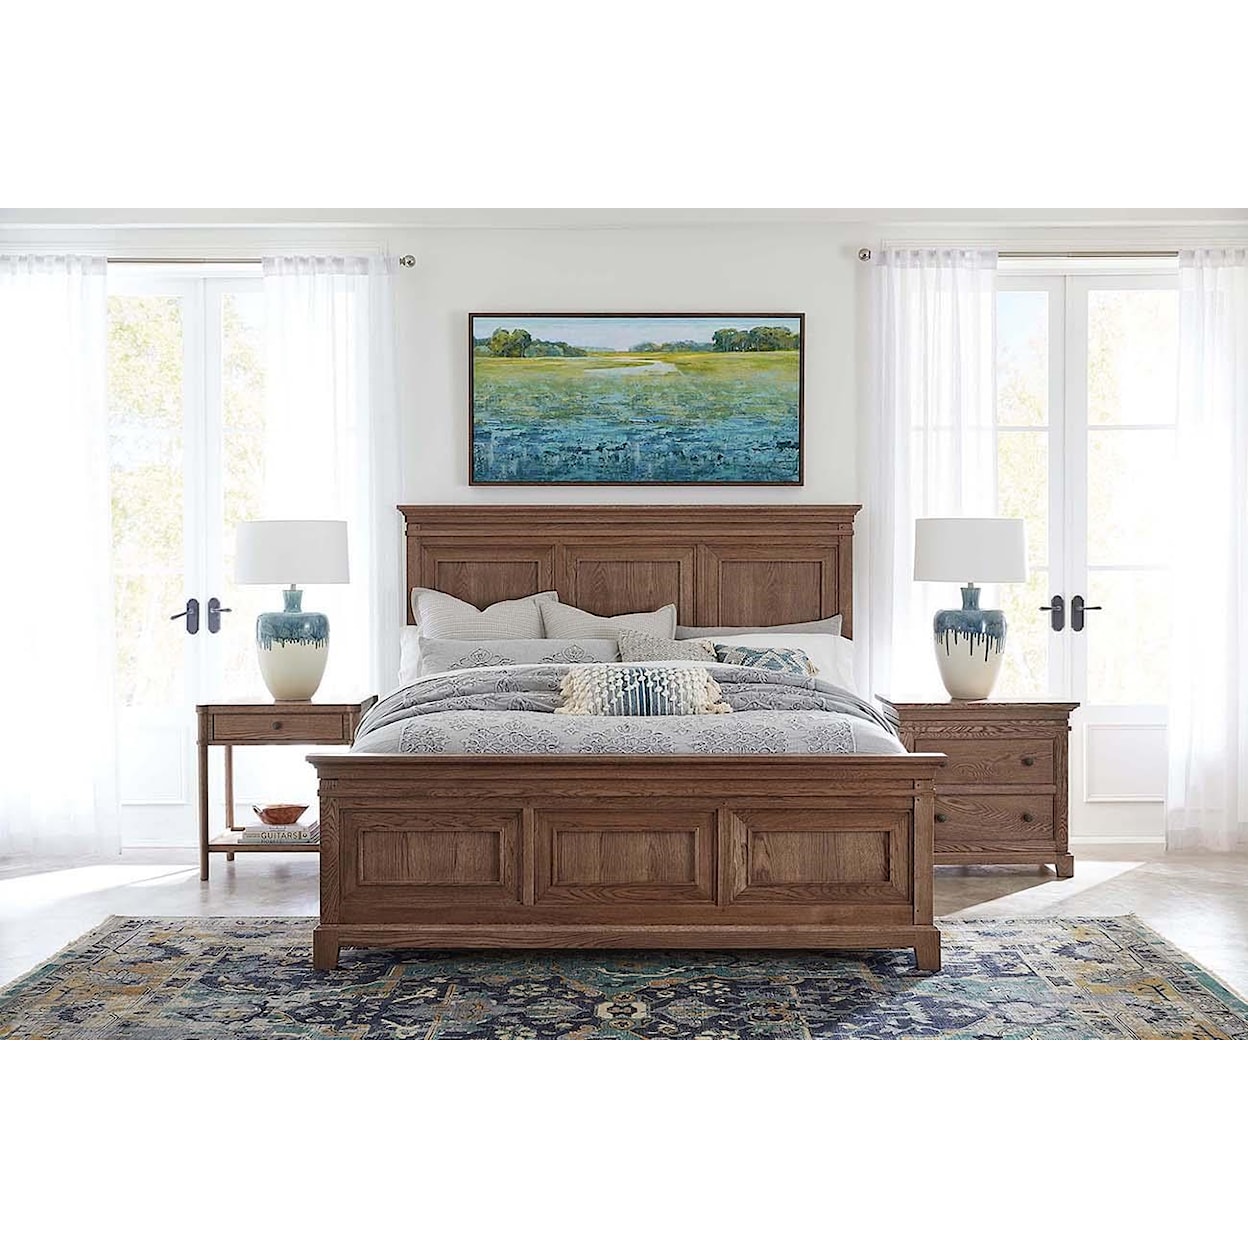 Stickley St. Lawrence St. Lawrence Open Nightstand